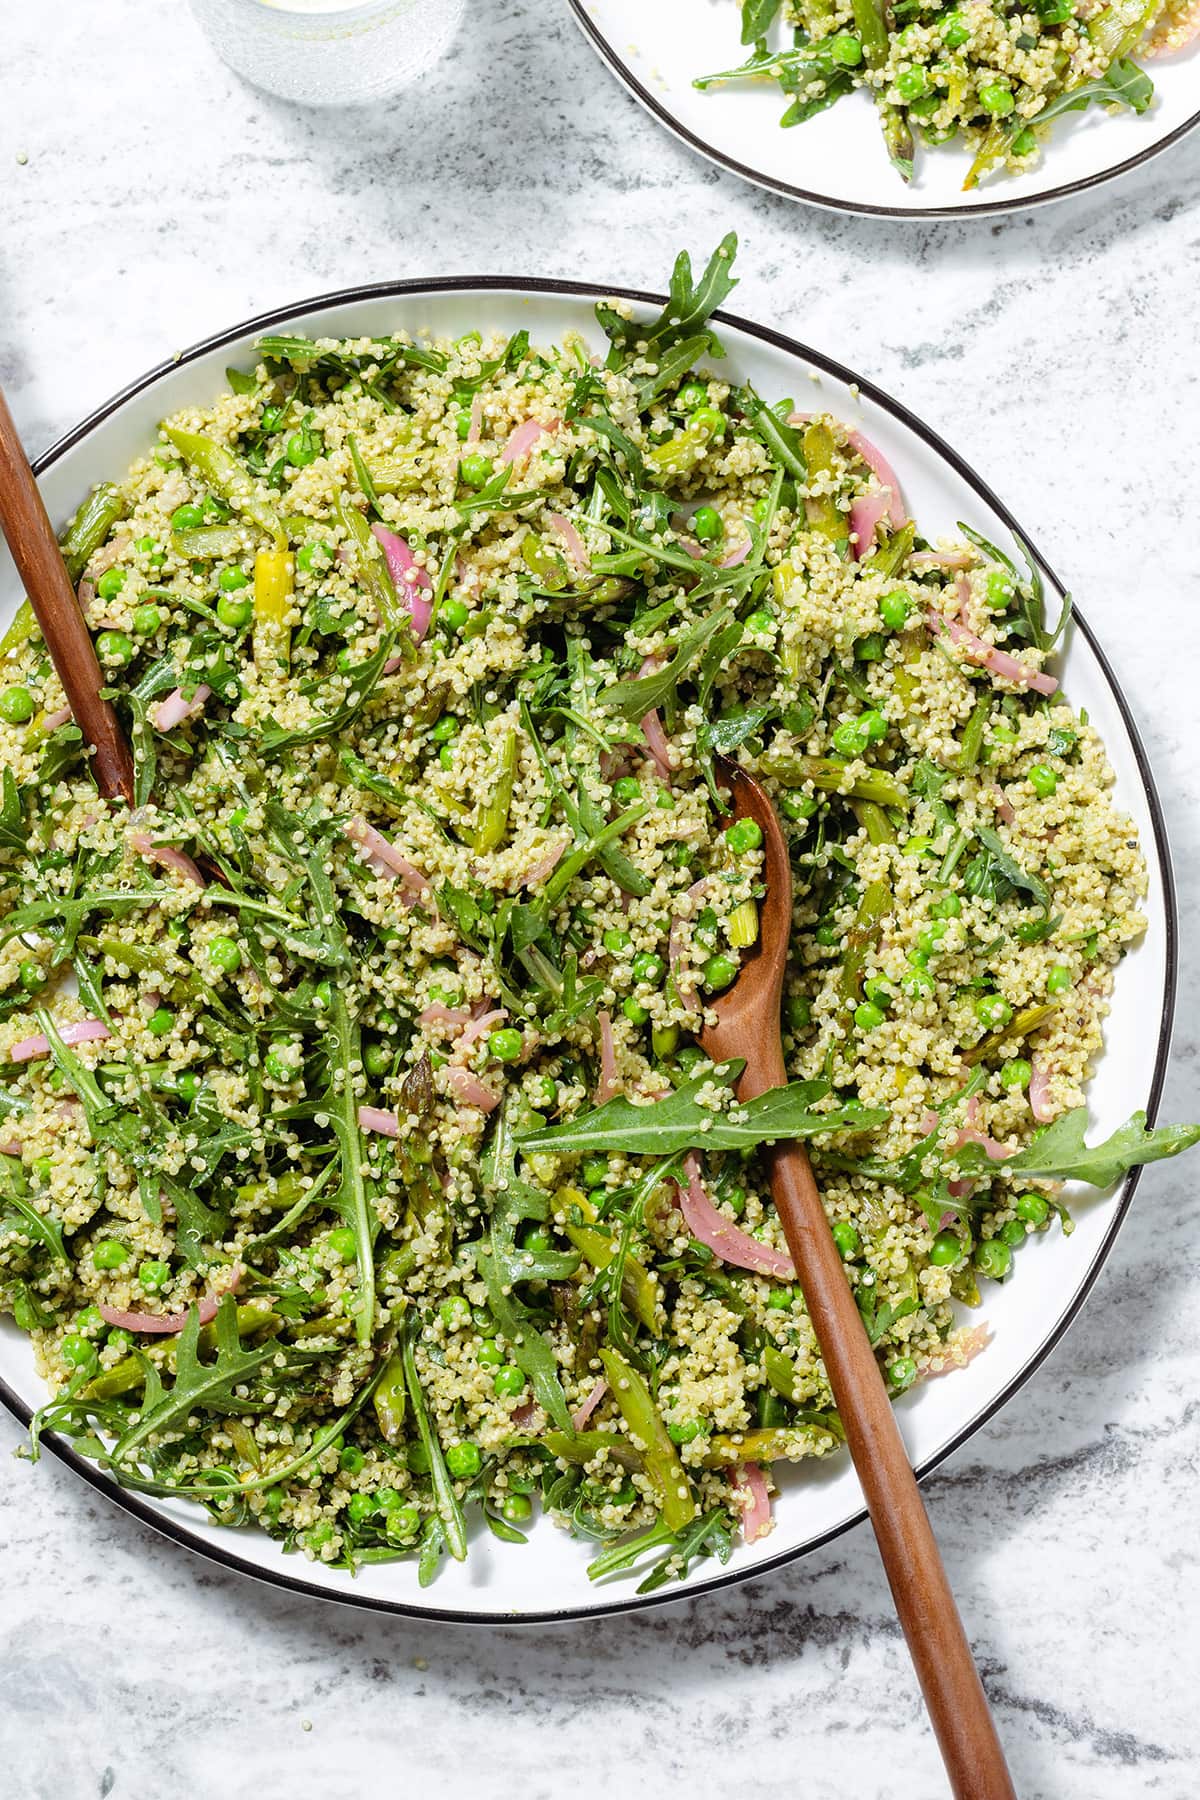 Quinoa salad with arugula, asparagus, and peas on a large serving platter with wooden spoons inserted in it.